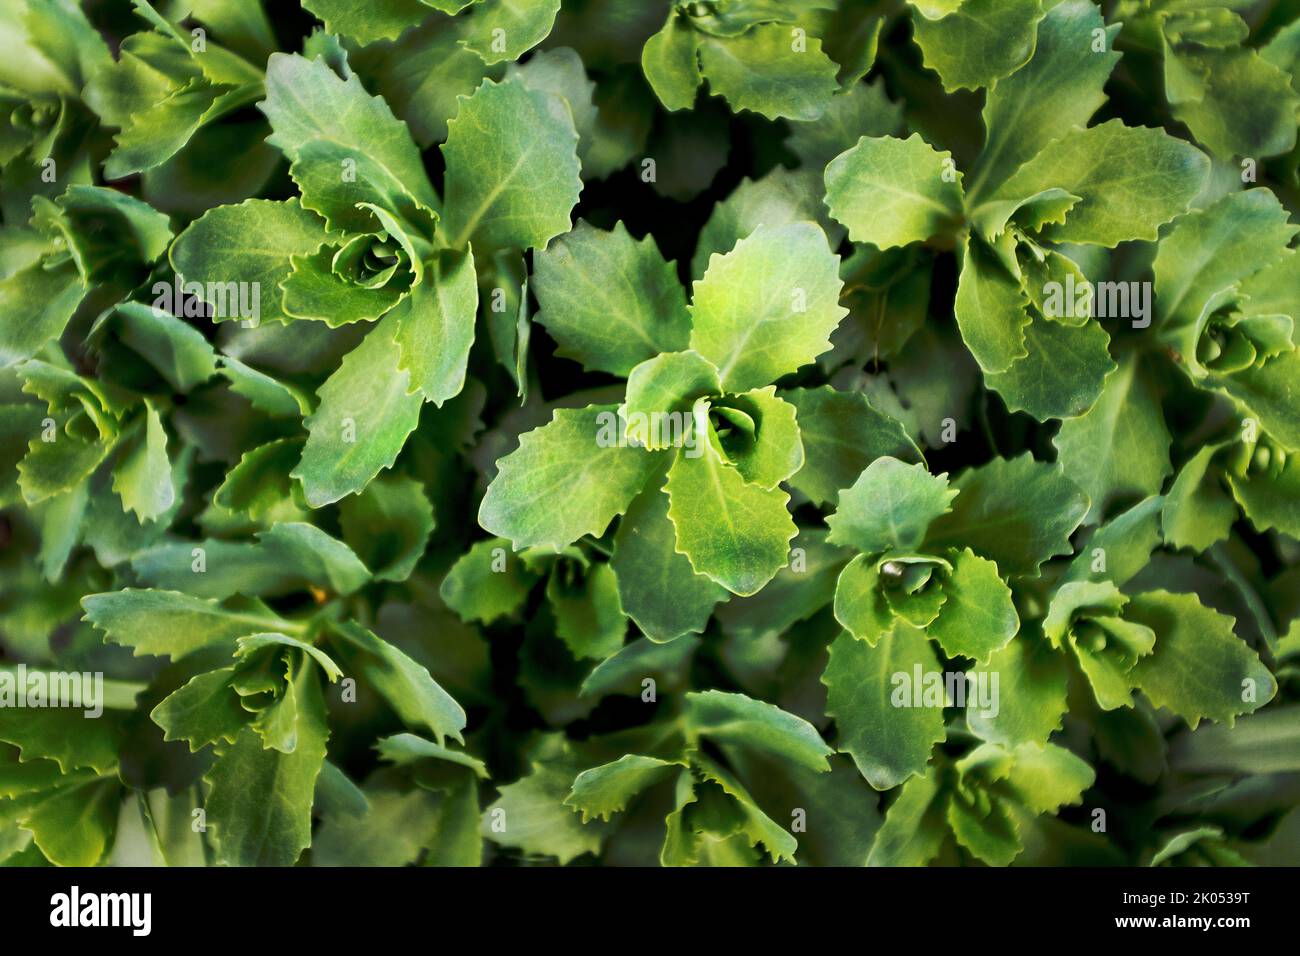 High Angle View of Pachysandra Stock Photo